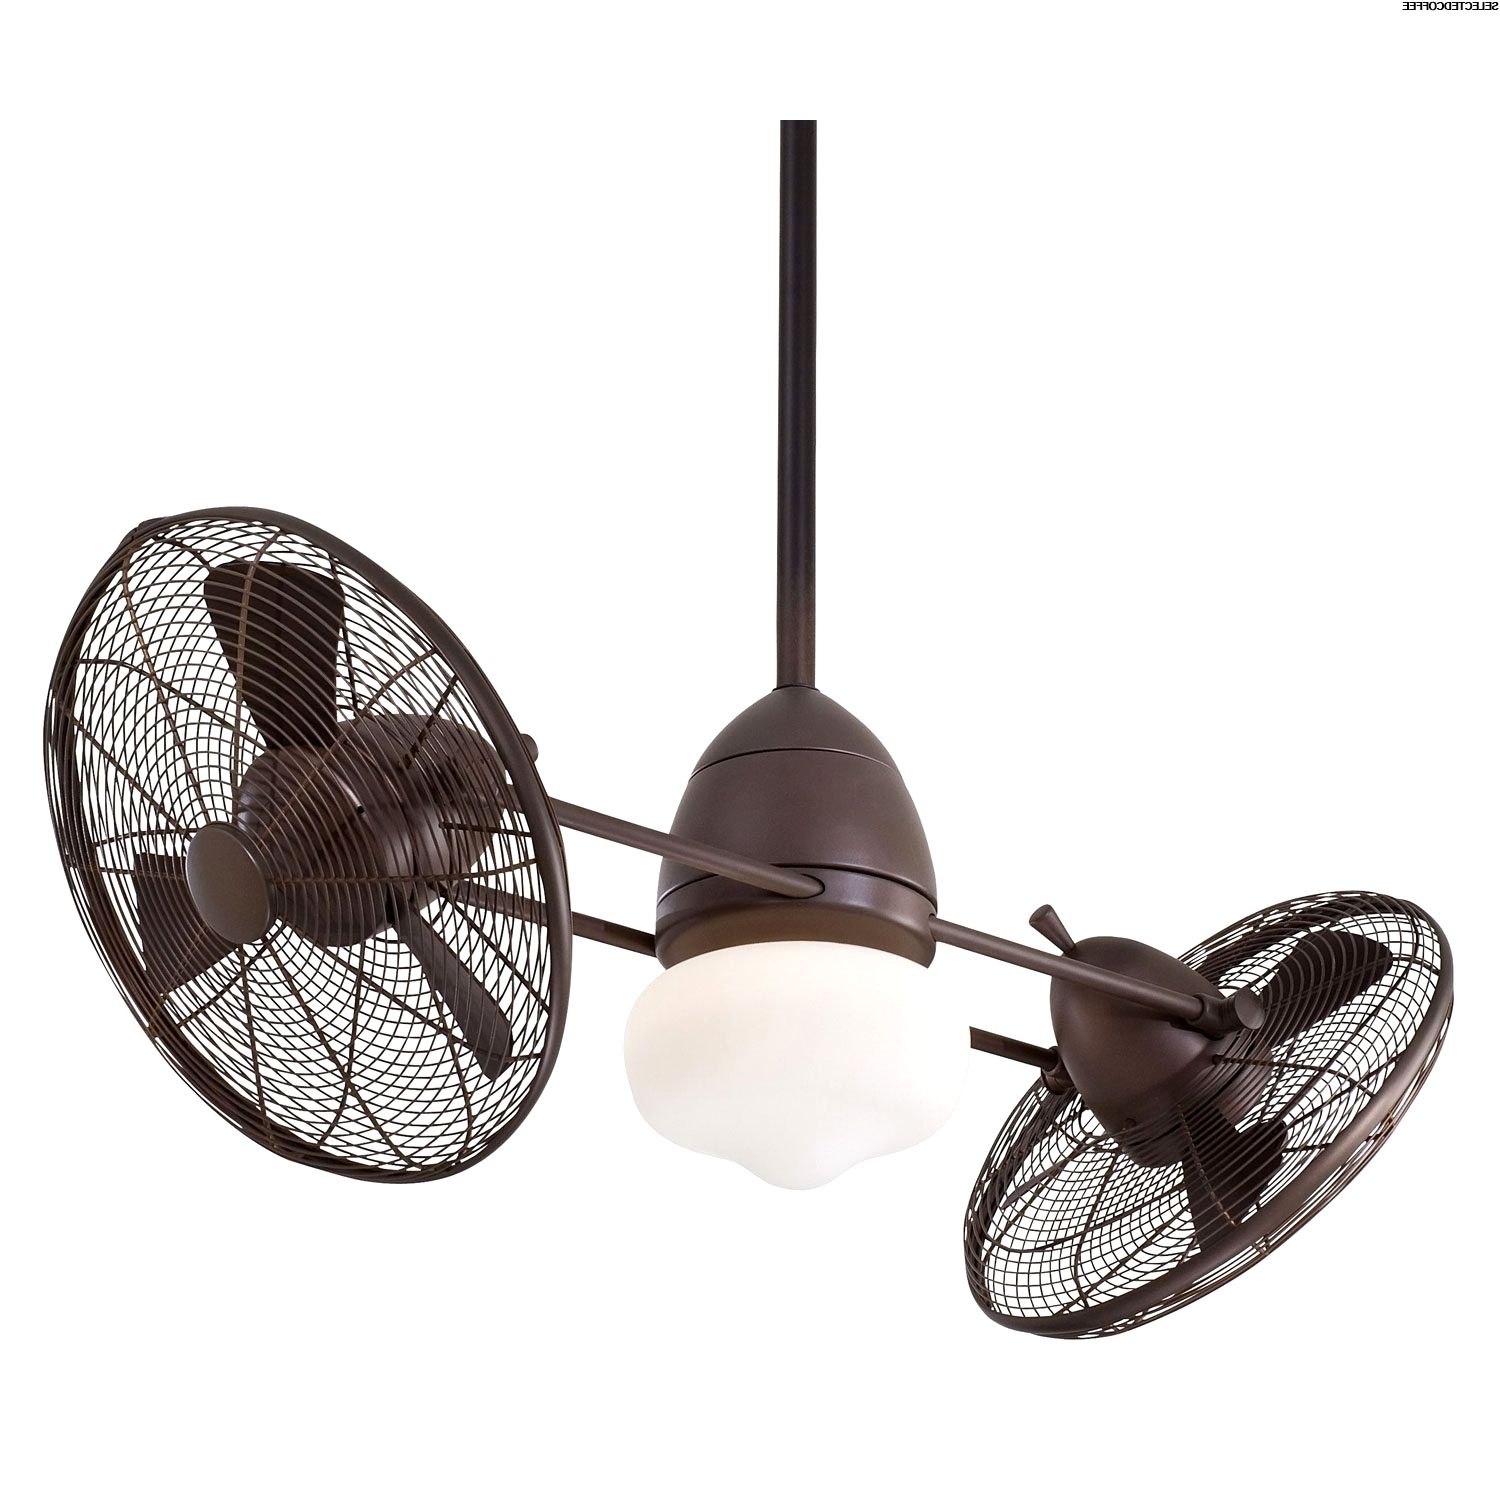 Wicker Outdoor Ceiling Fans With Lights In Latest 49 Hd Outdoor Fan With Light Gallery (View 20 of 20)